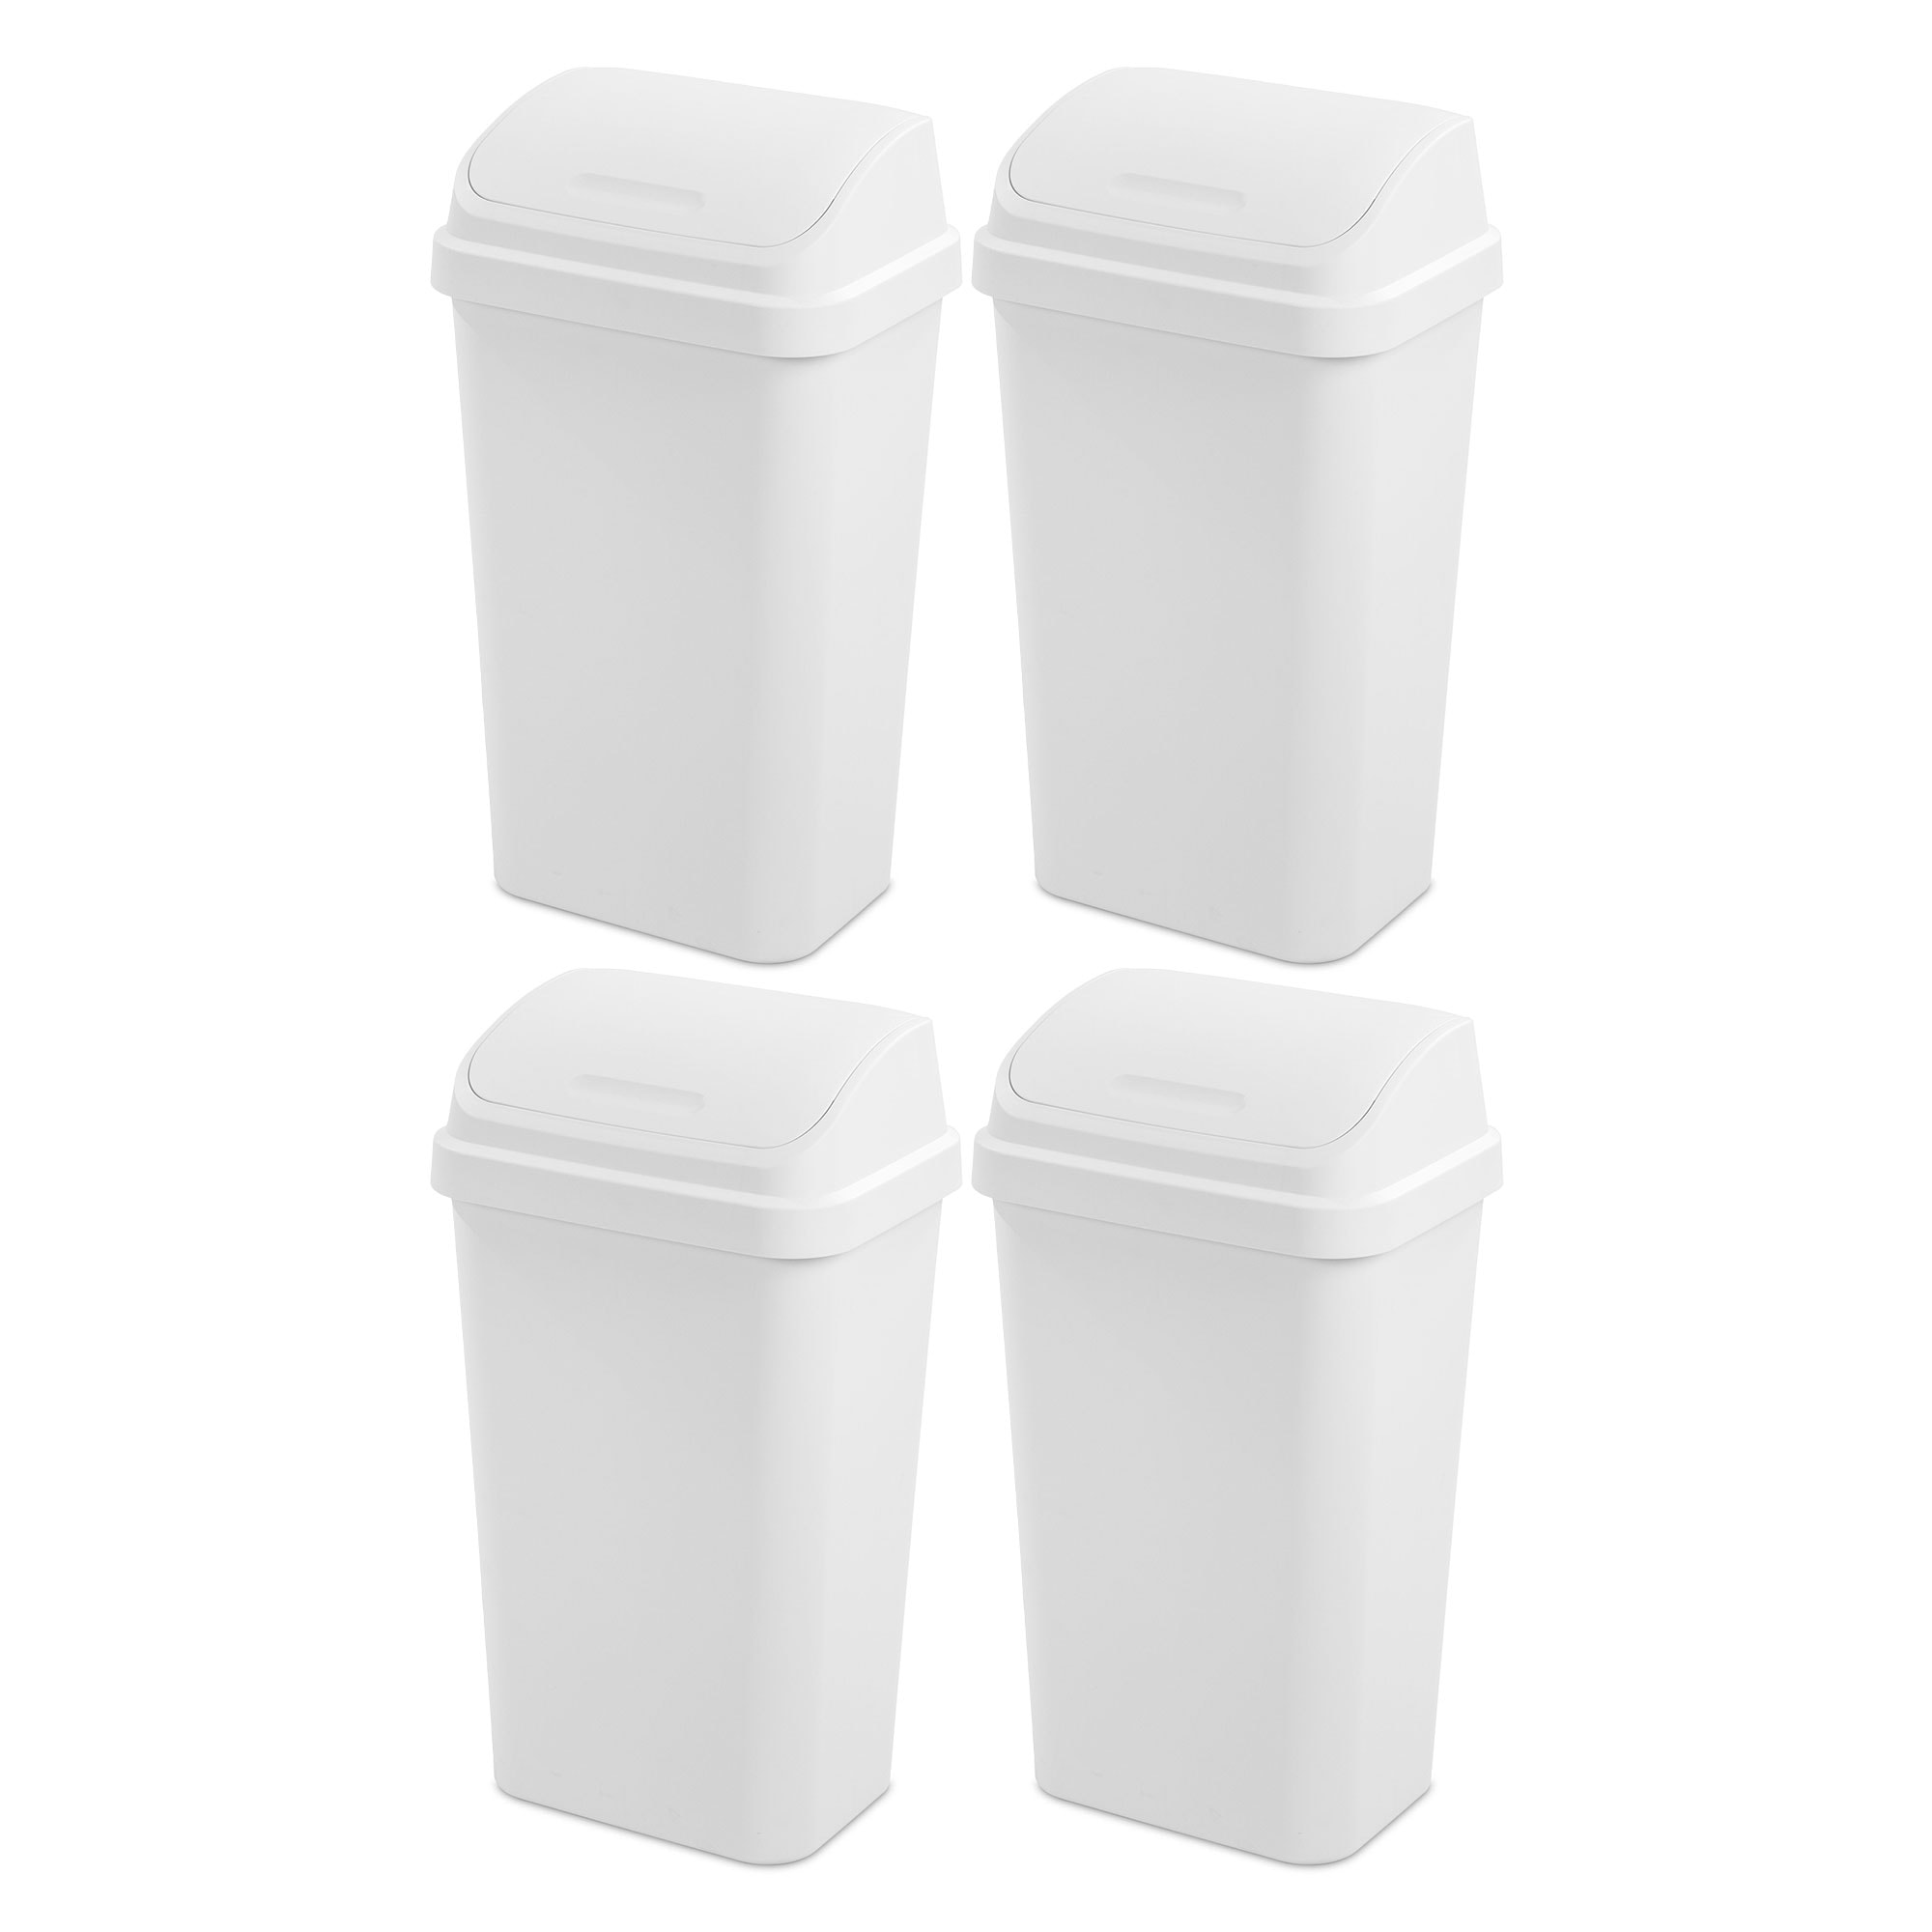 https://ak1.ostkcdn.com/images/products/is/images/direct/90690d1e520d13fee83c931da02b8550dee7234f/Sterilite-13-Gal-Swing-Top-Lidded-Wastebasket-Kitchen-Trash-Can%2C-White-%284-Pack%29.jpg